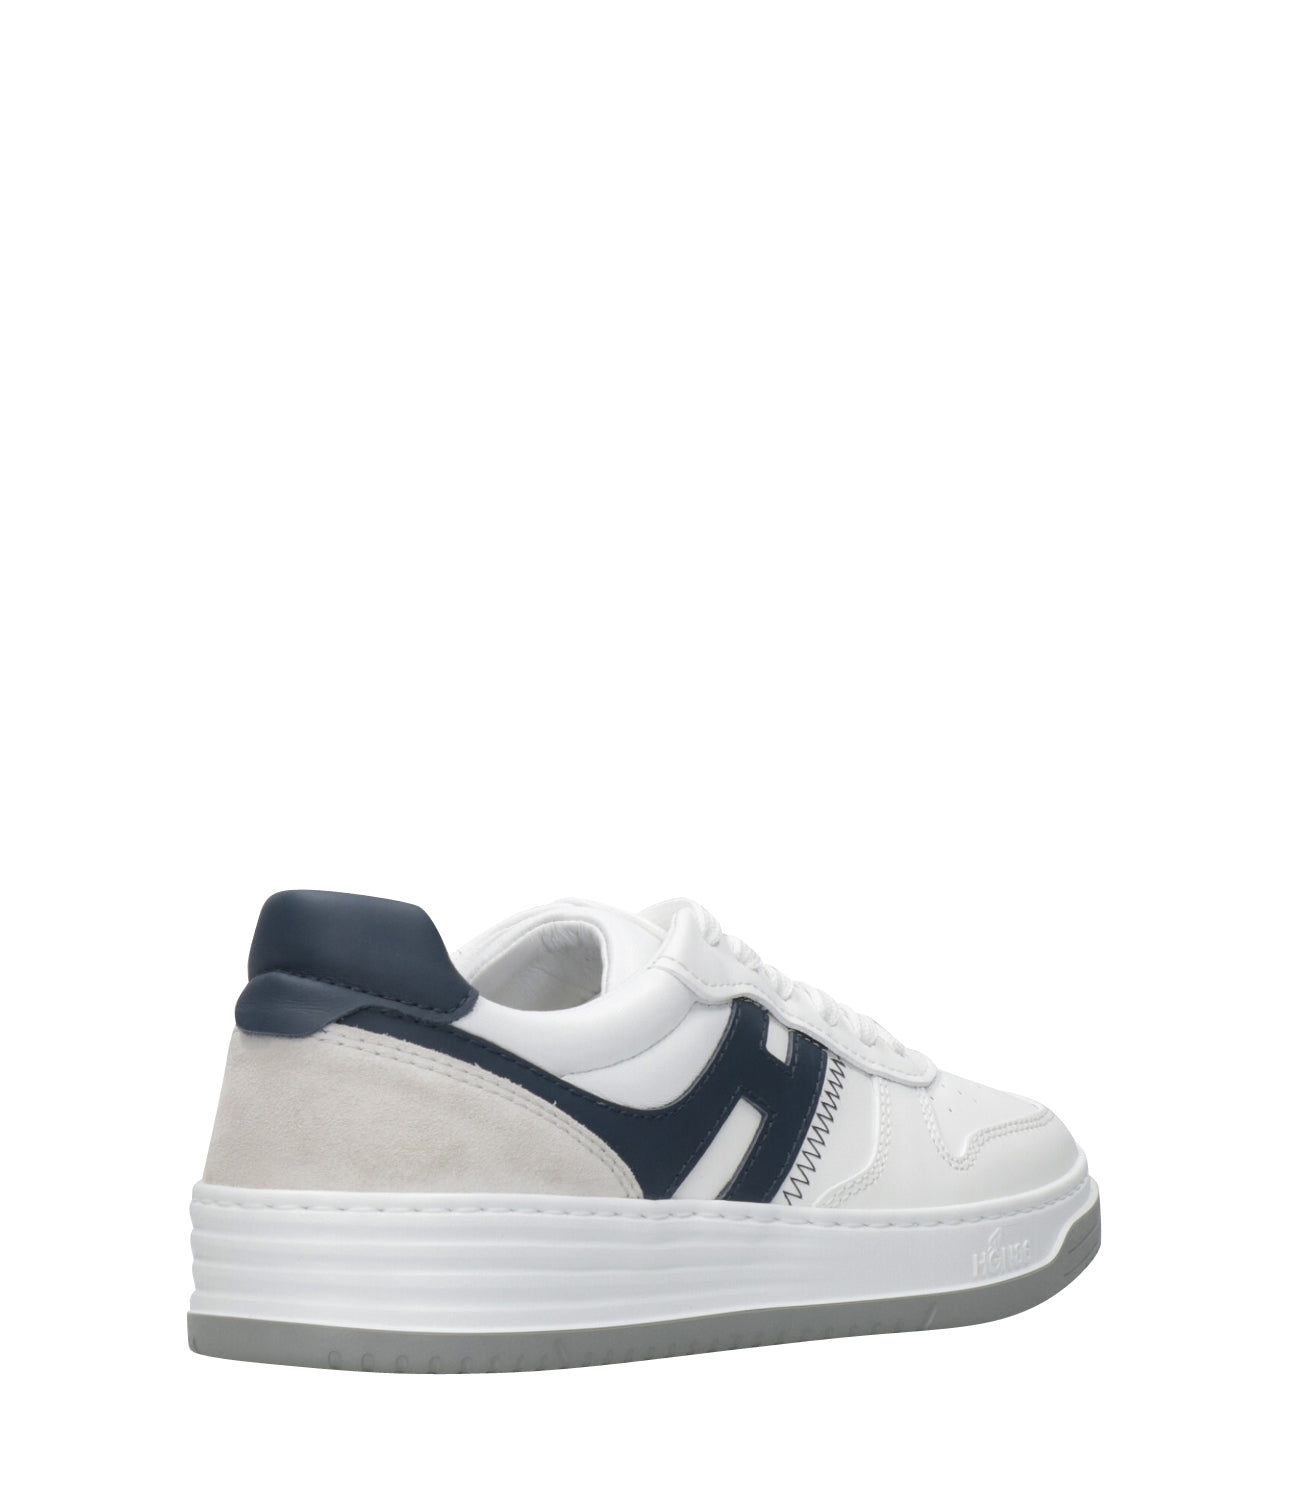 Hogan | Sneakers H630 White, Blue and Grey